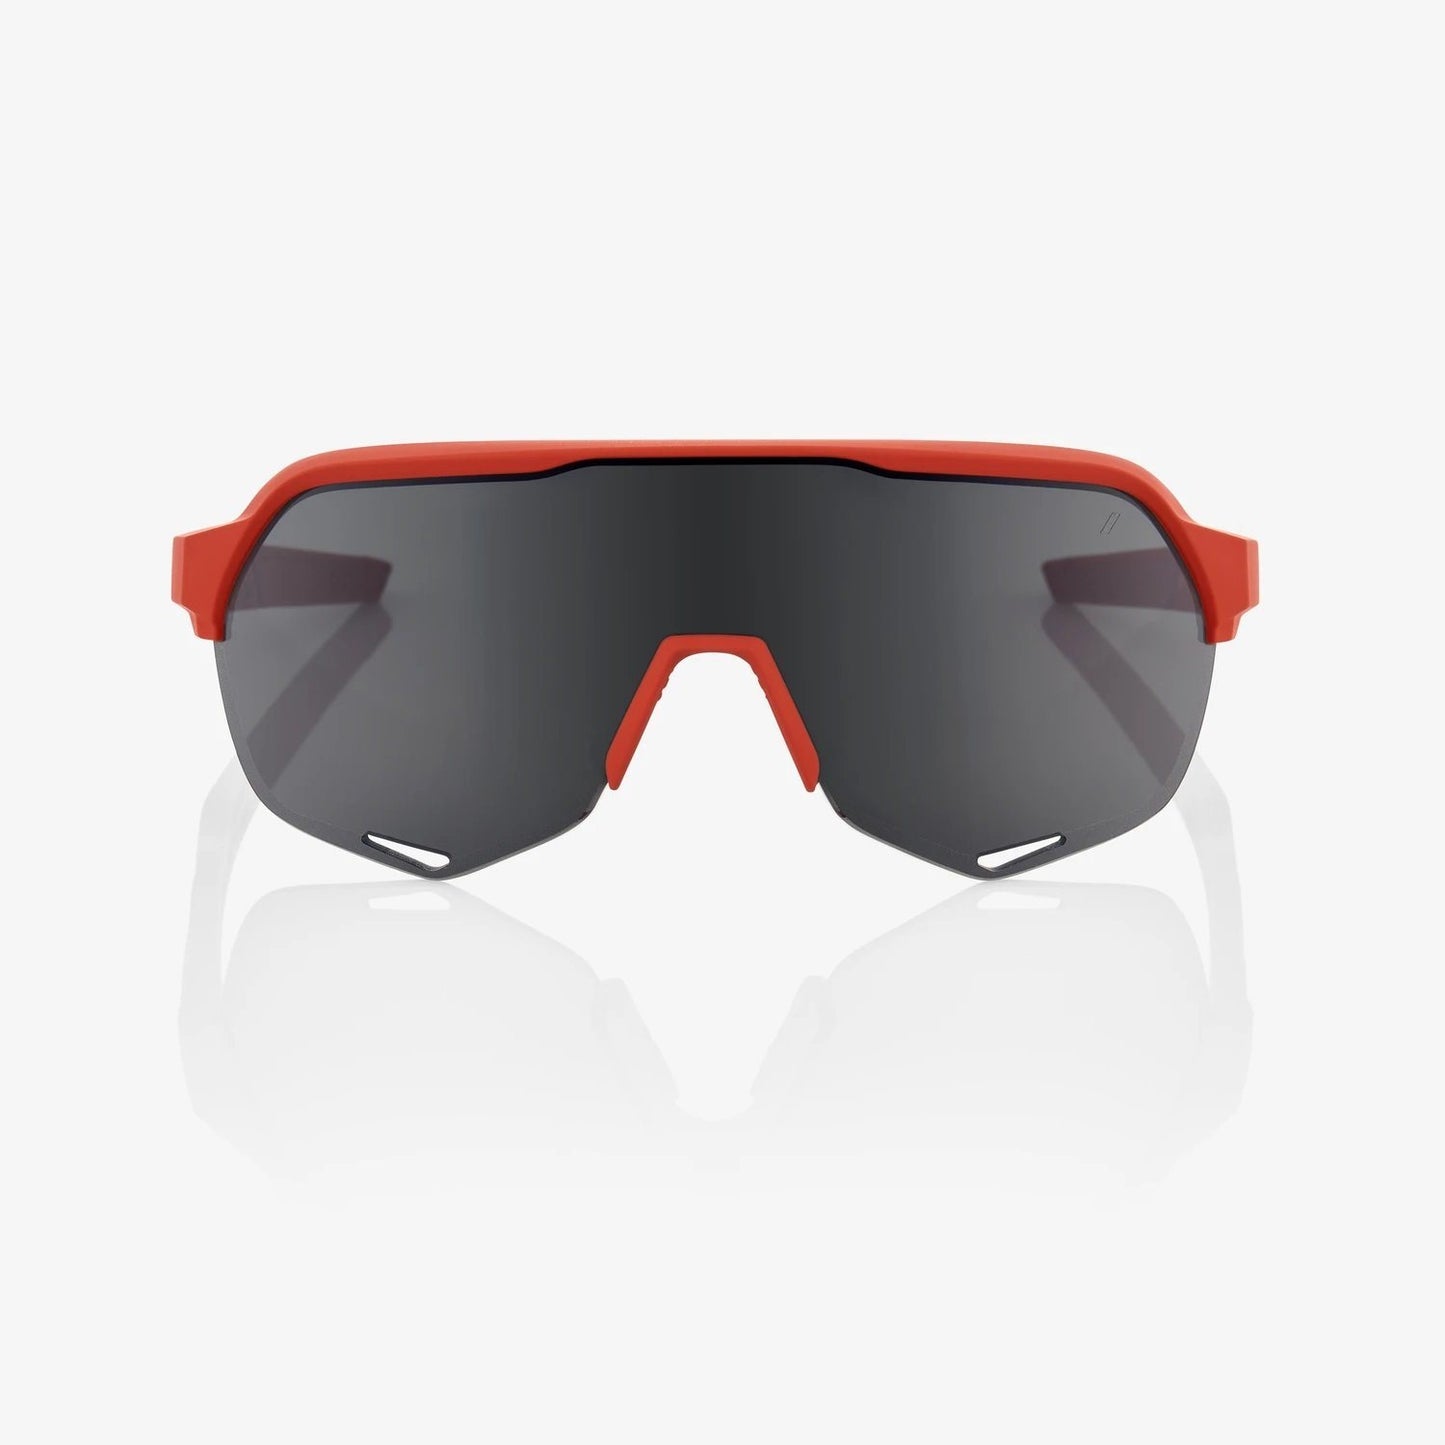 Lunettes S2 | Soft Tact Coral - Smoke Lens Lunettes 100% 